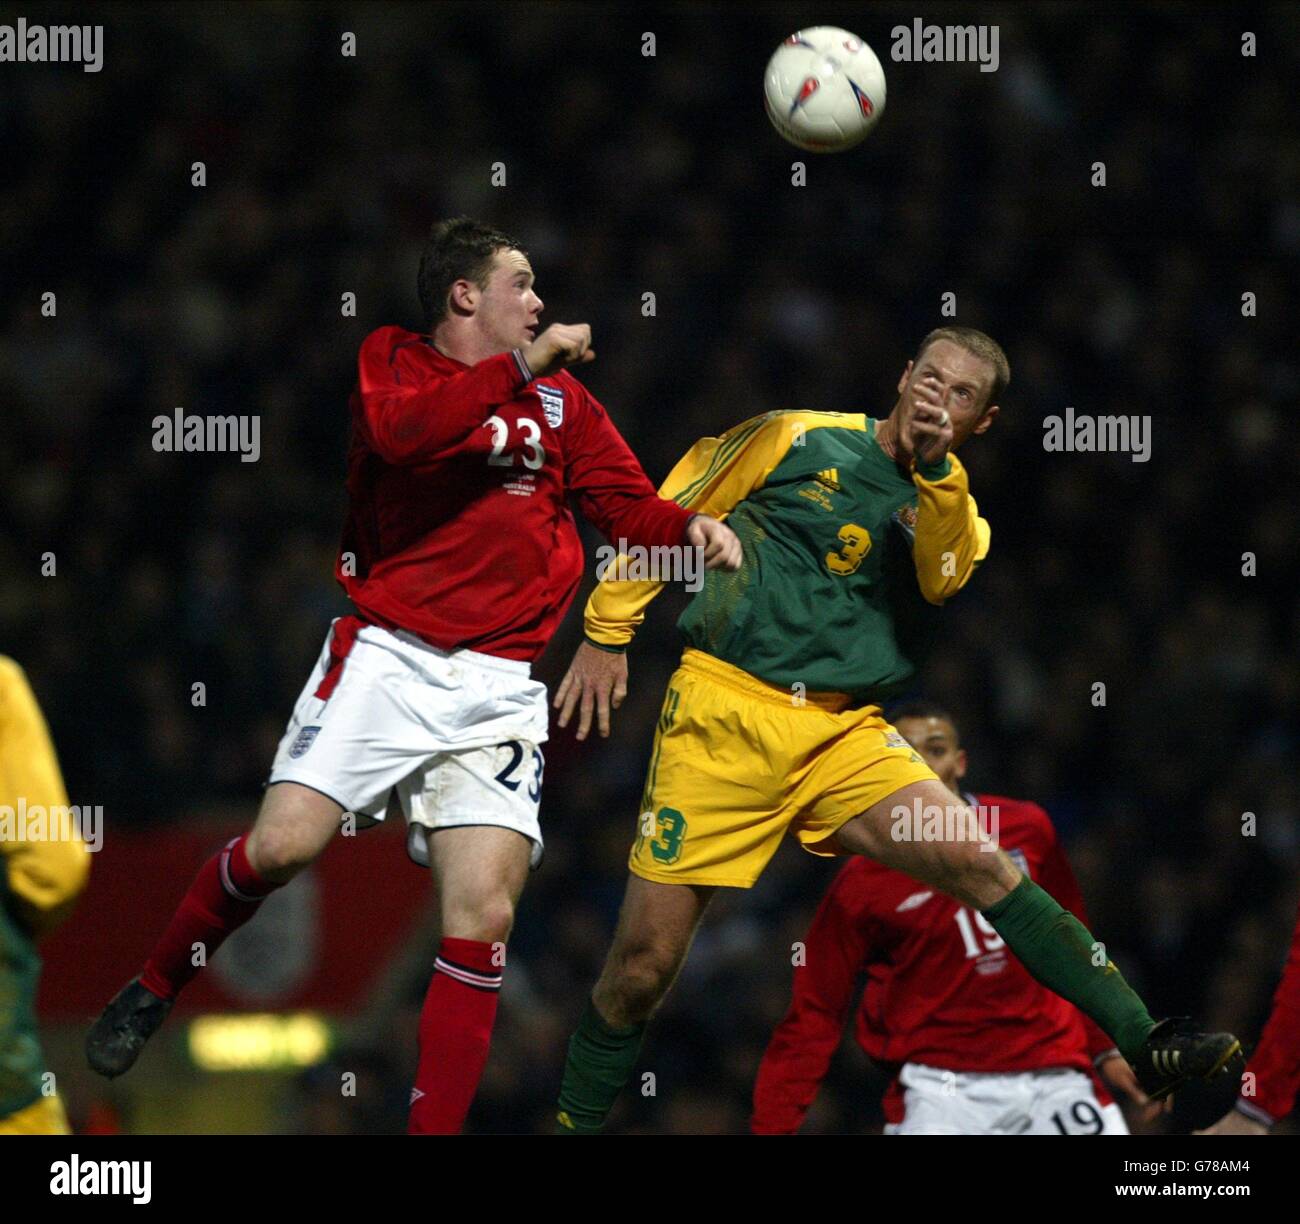 England's Wayne Rooney (left) battles for the ball against Australia's Craig Moore during the friendly International match against Australia at Upton Park, east London. Australia defeated England 3-1. Stock Photo